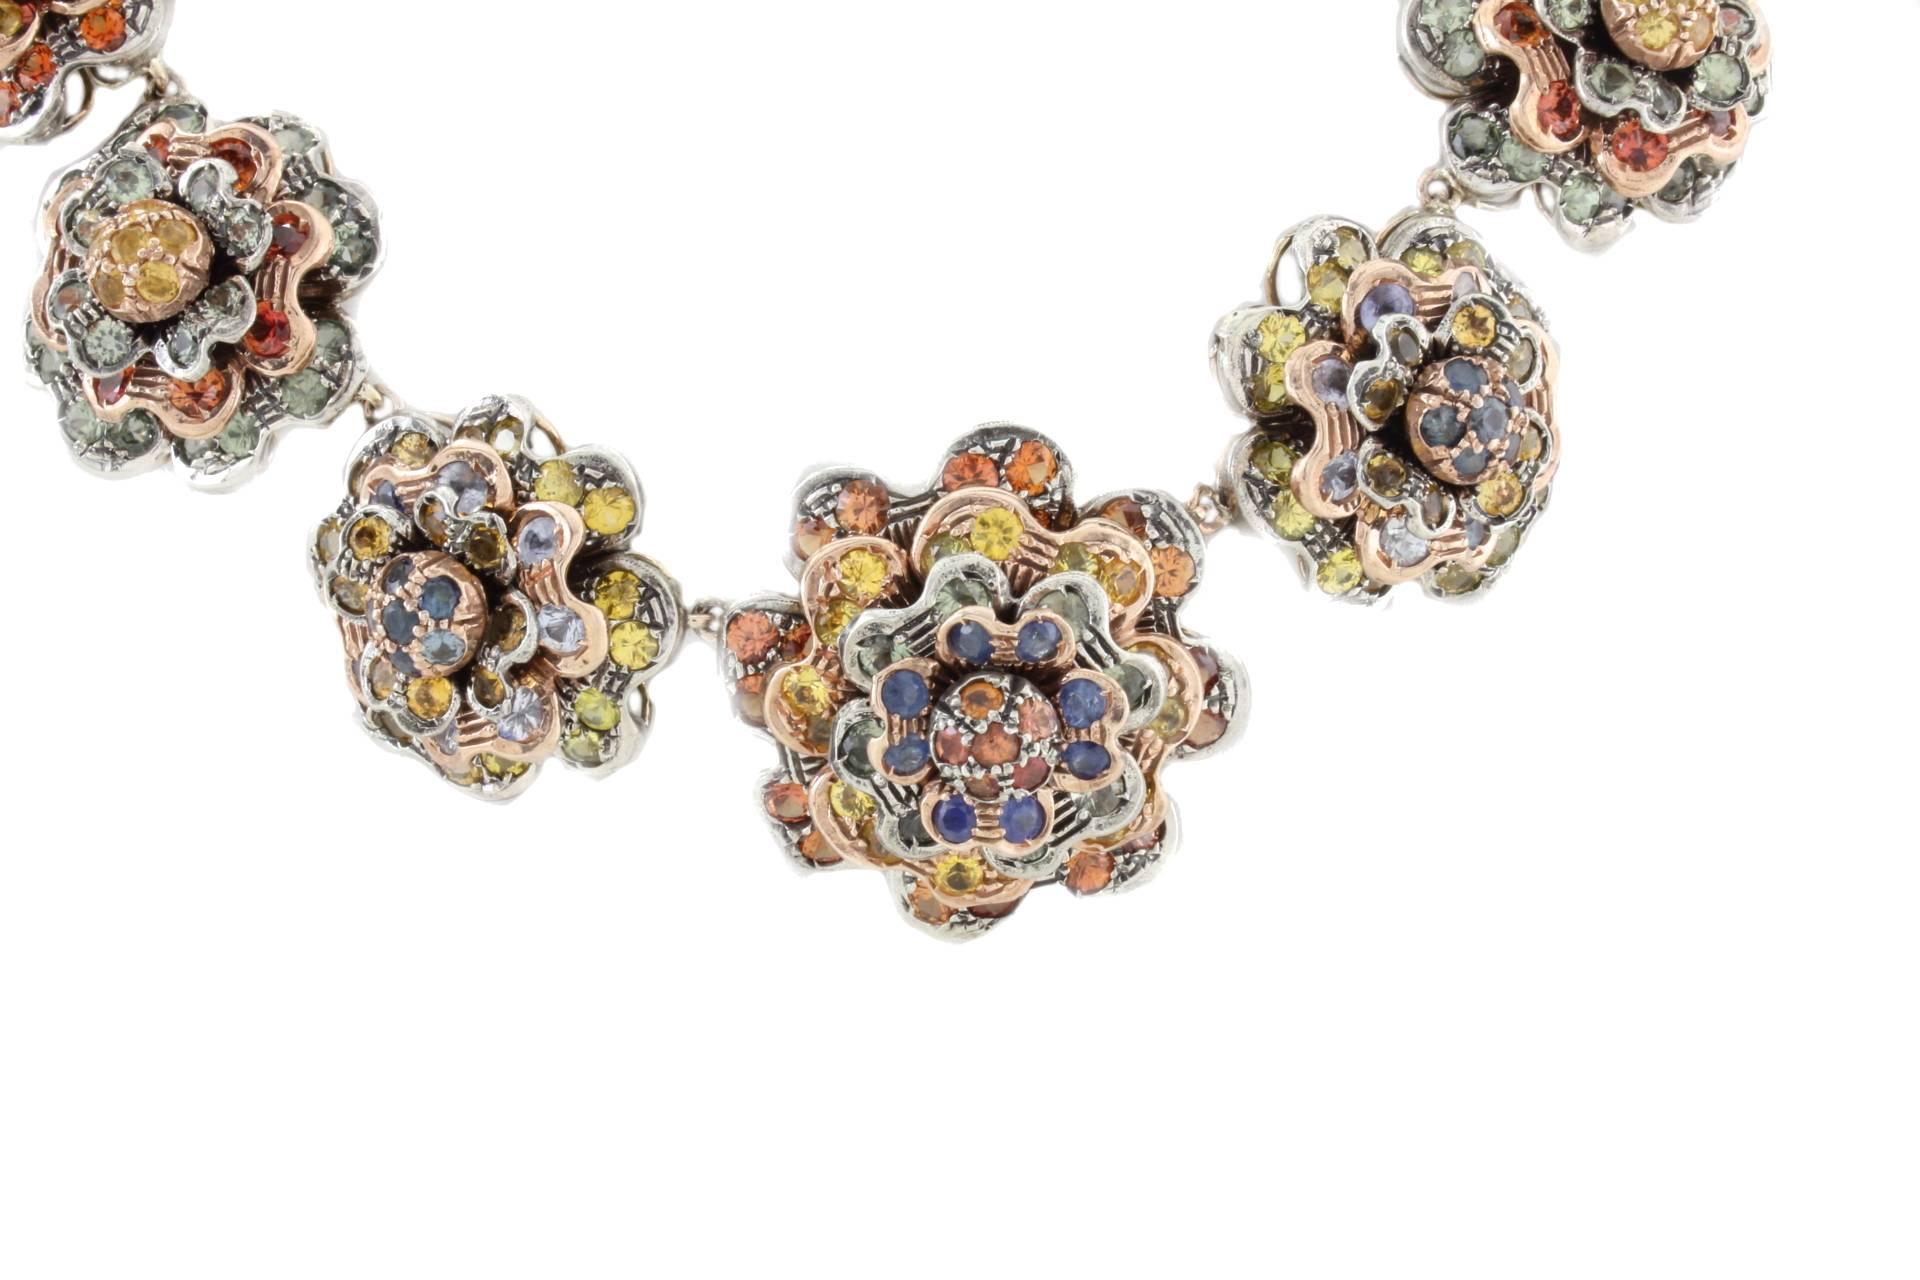 This fashion design flowers choker necklace it is mounted in 9Kt rose gold and silver. All the flowers are composed of multi colored sapphires (77.22Kt) Tot weight 156.1 gr
R.f 962541

For any enquires, please contact the seller through the message